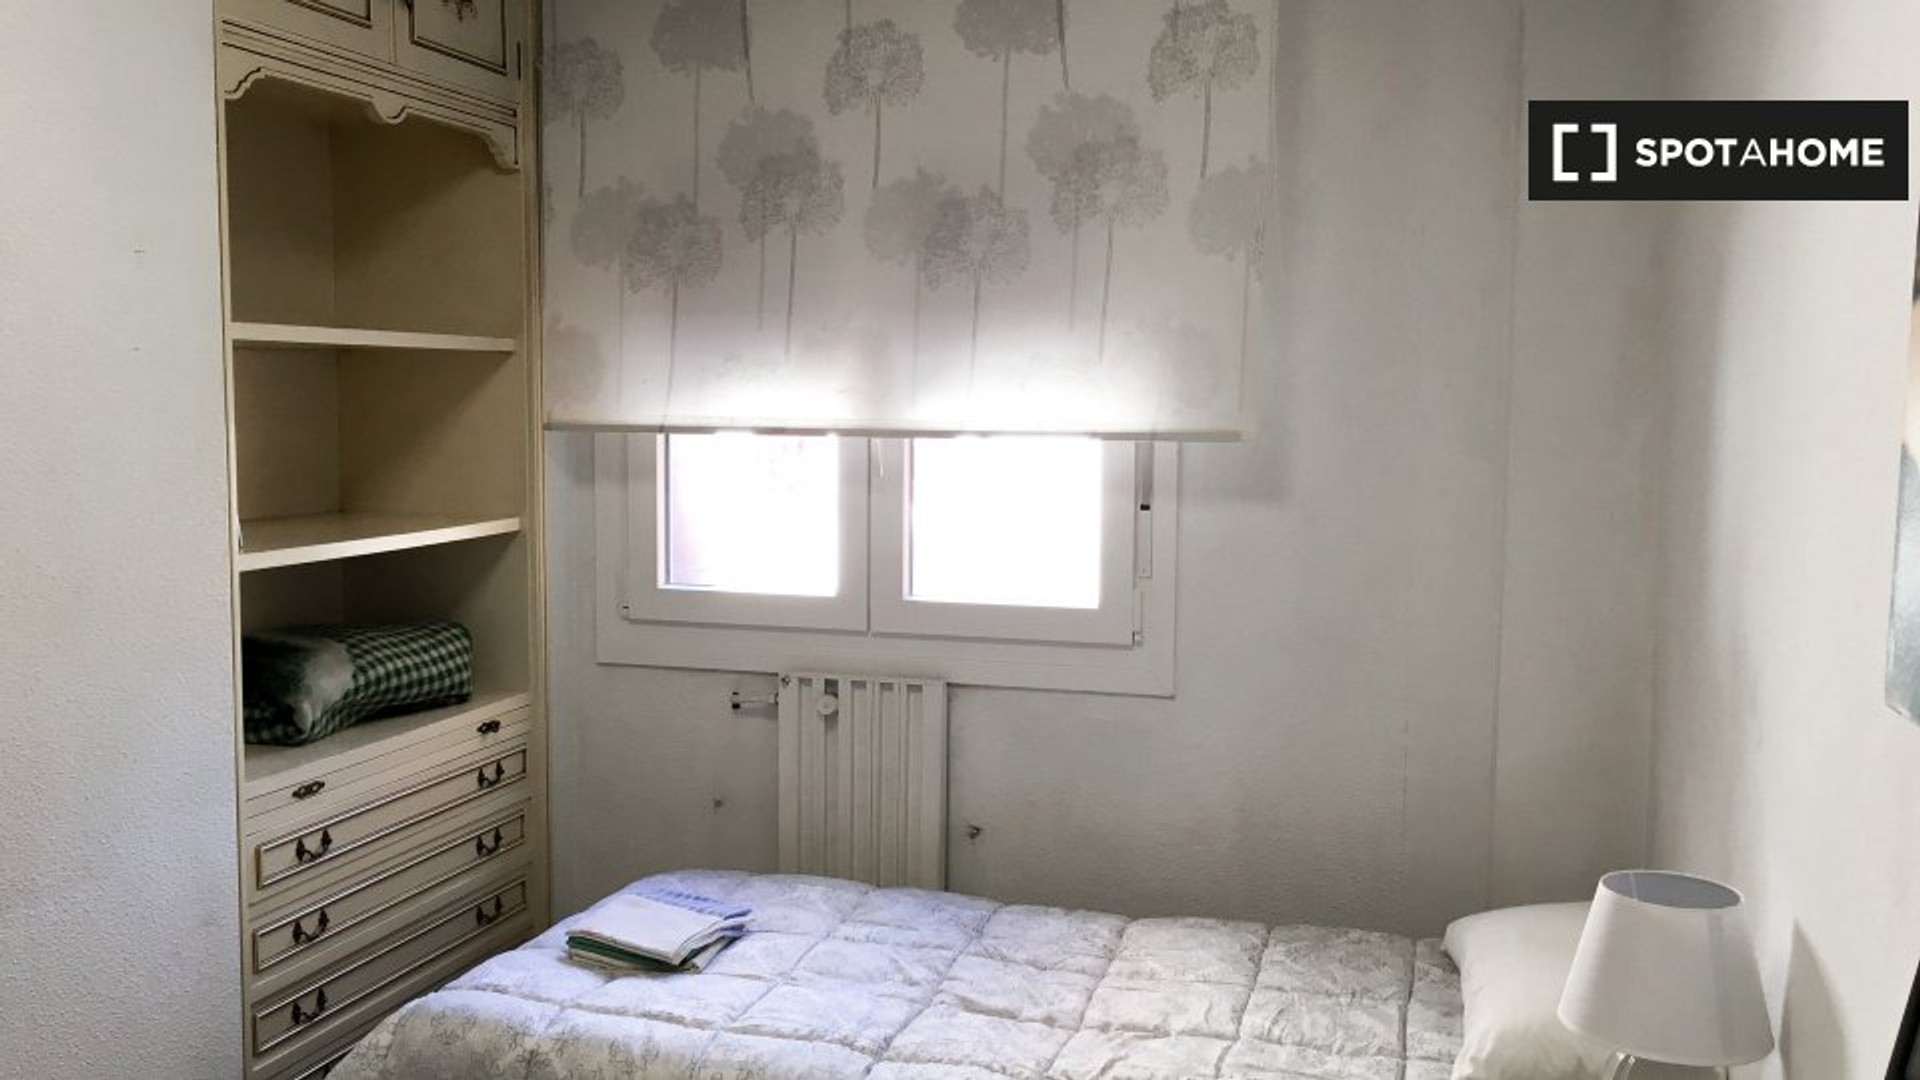 Room for rent with double bed Pamplona/iruña